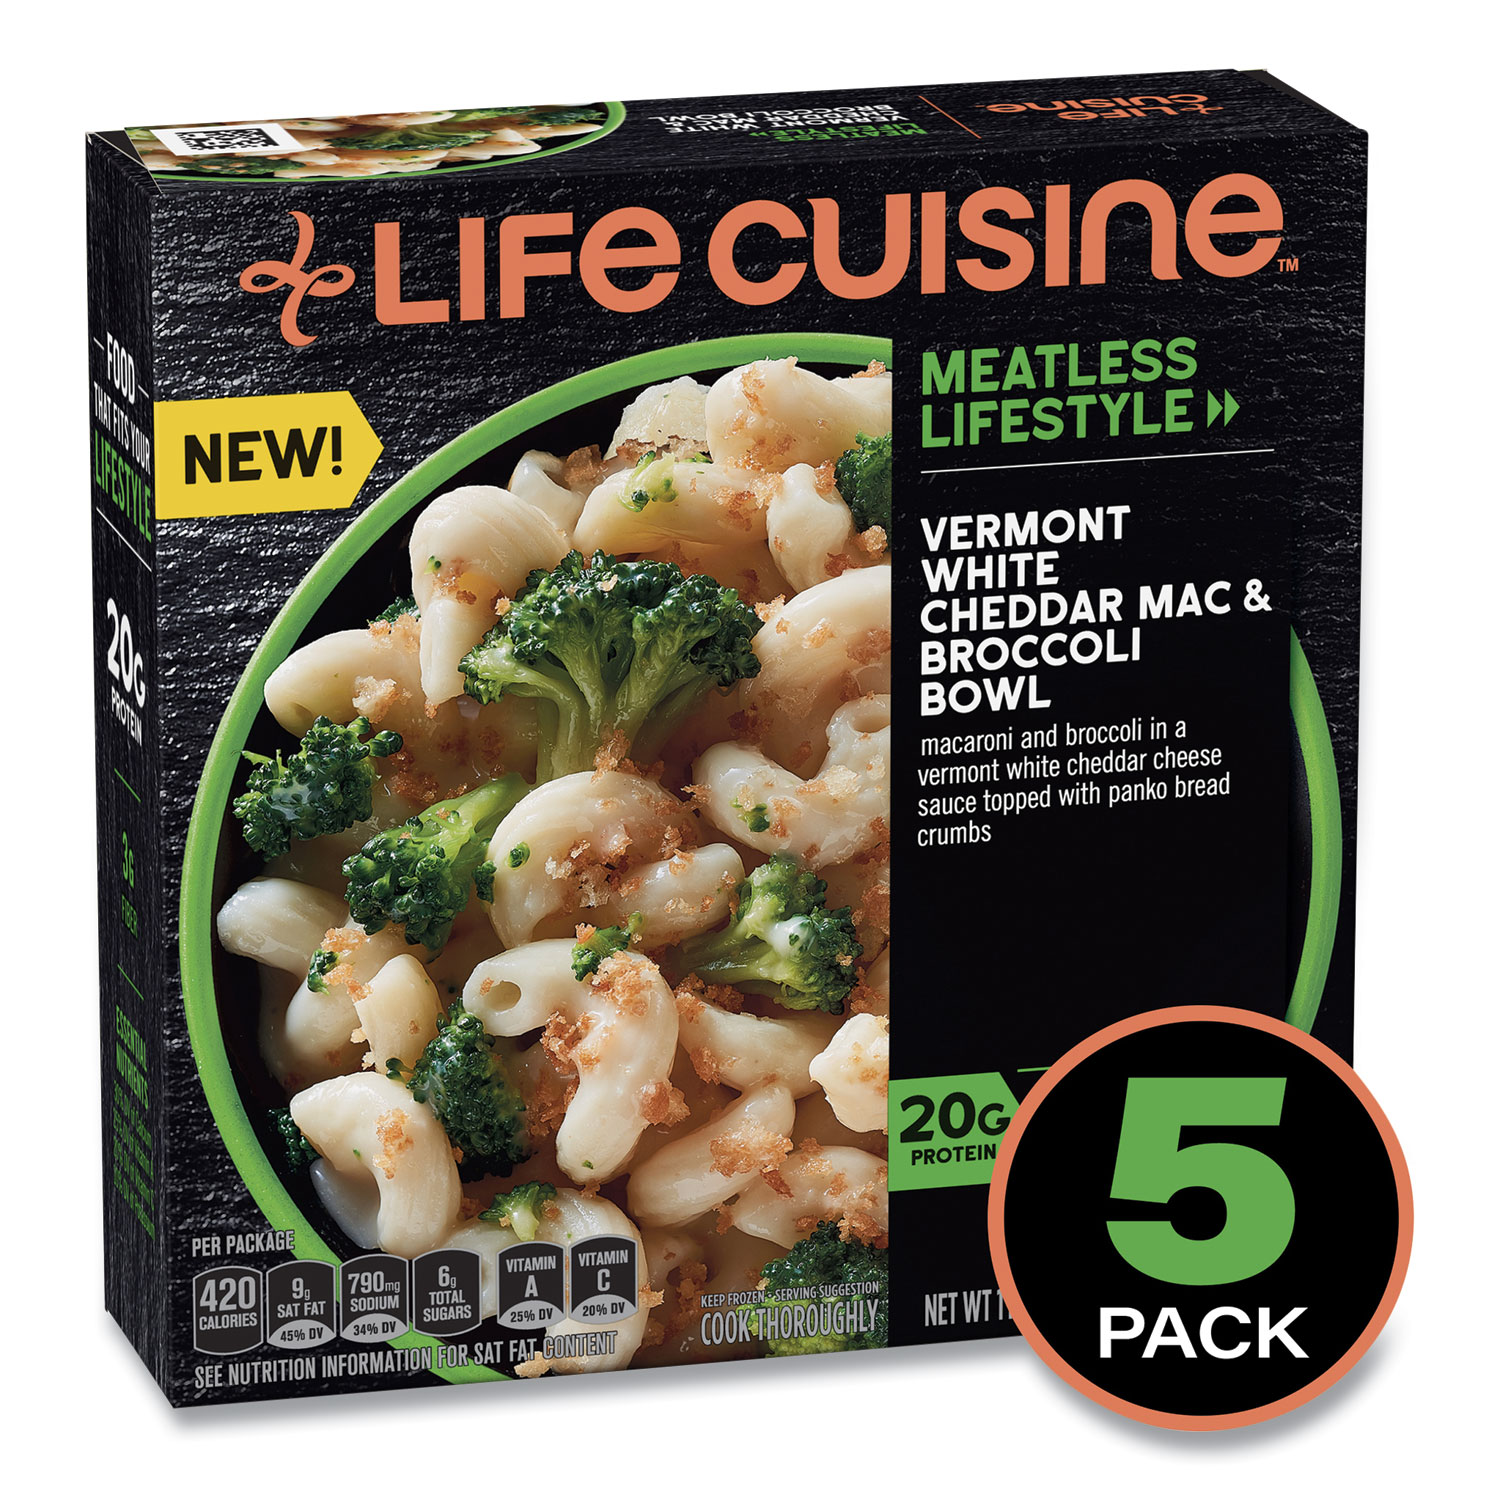  Life Cuisine 12425472 Meatless Lifestyle Vermont White Cheddar Mac and Broccoli Bowl, 11 oz Bowl, 5/Pack, Free Delivery in 1-4 Business Days (GRR90300202) 